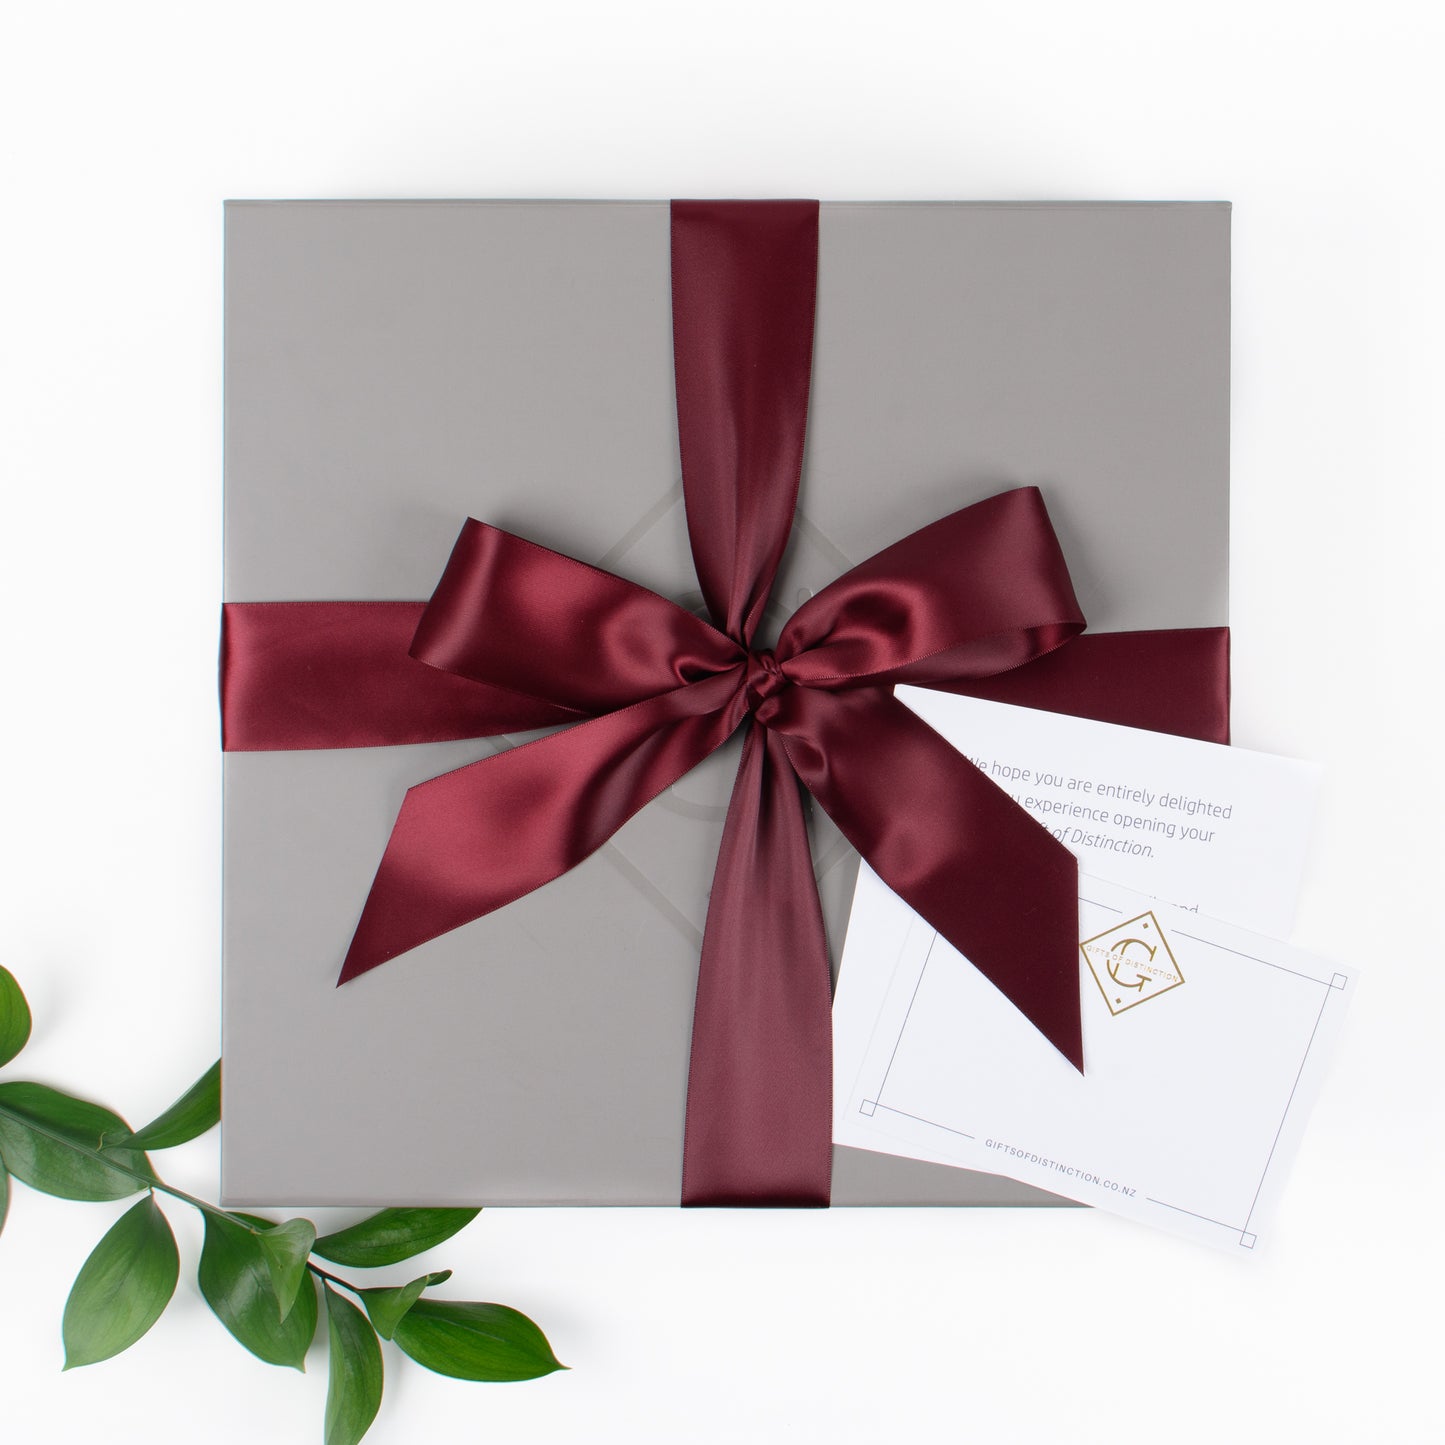 Beautiful grey gift box with burgundy satin ribbon and gold foil message card.